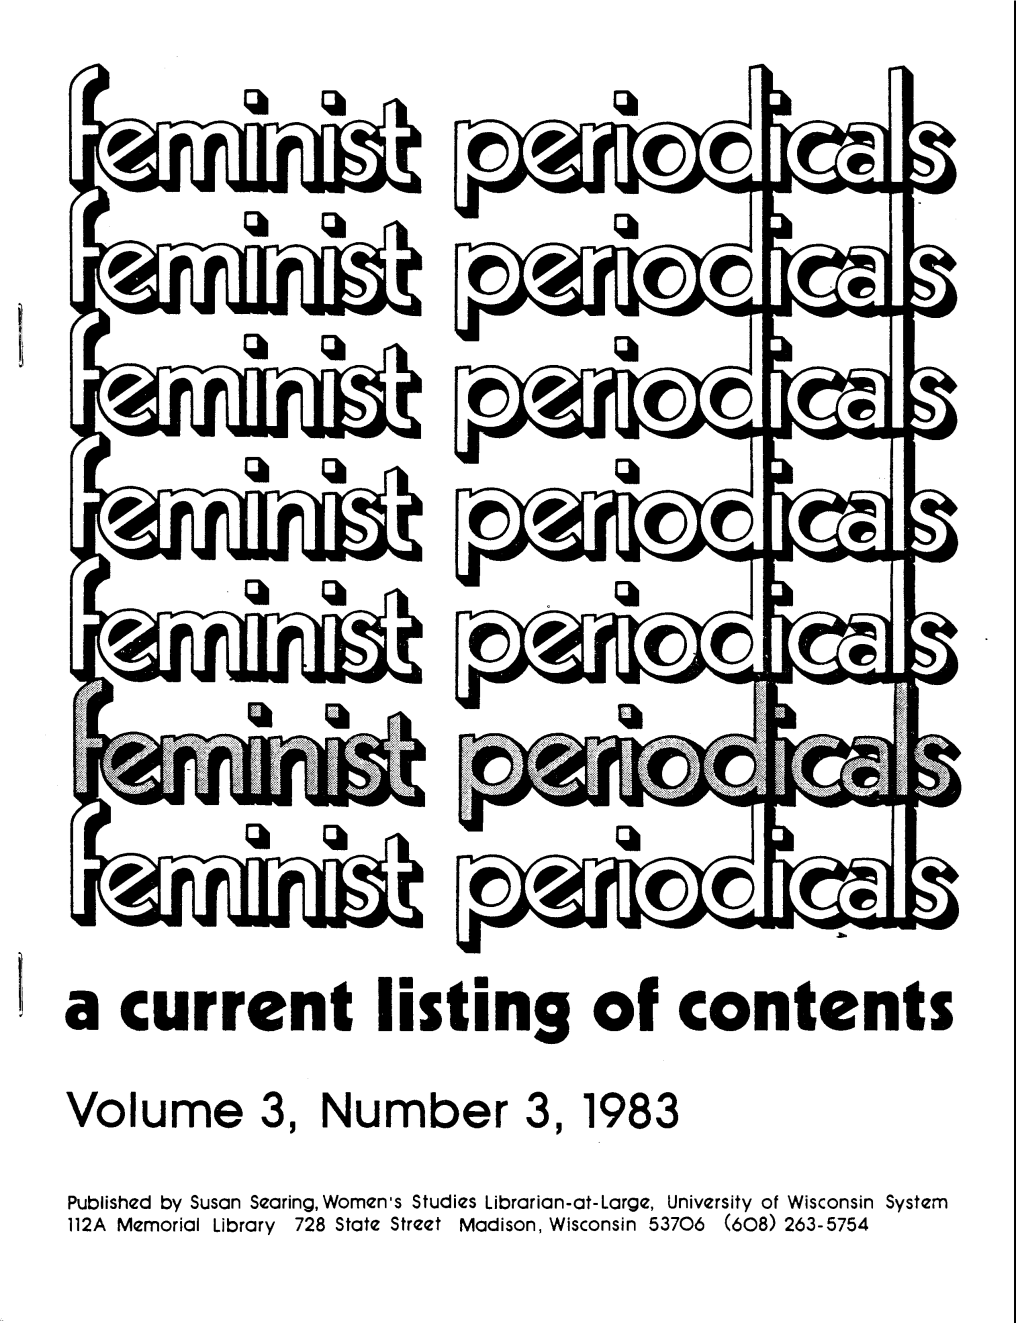 A Current Listing of Contents Volume 3, Number 3, 1983